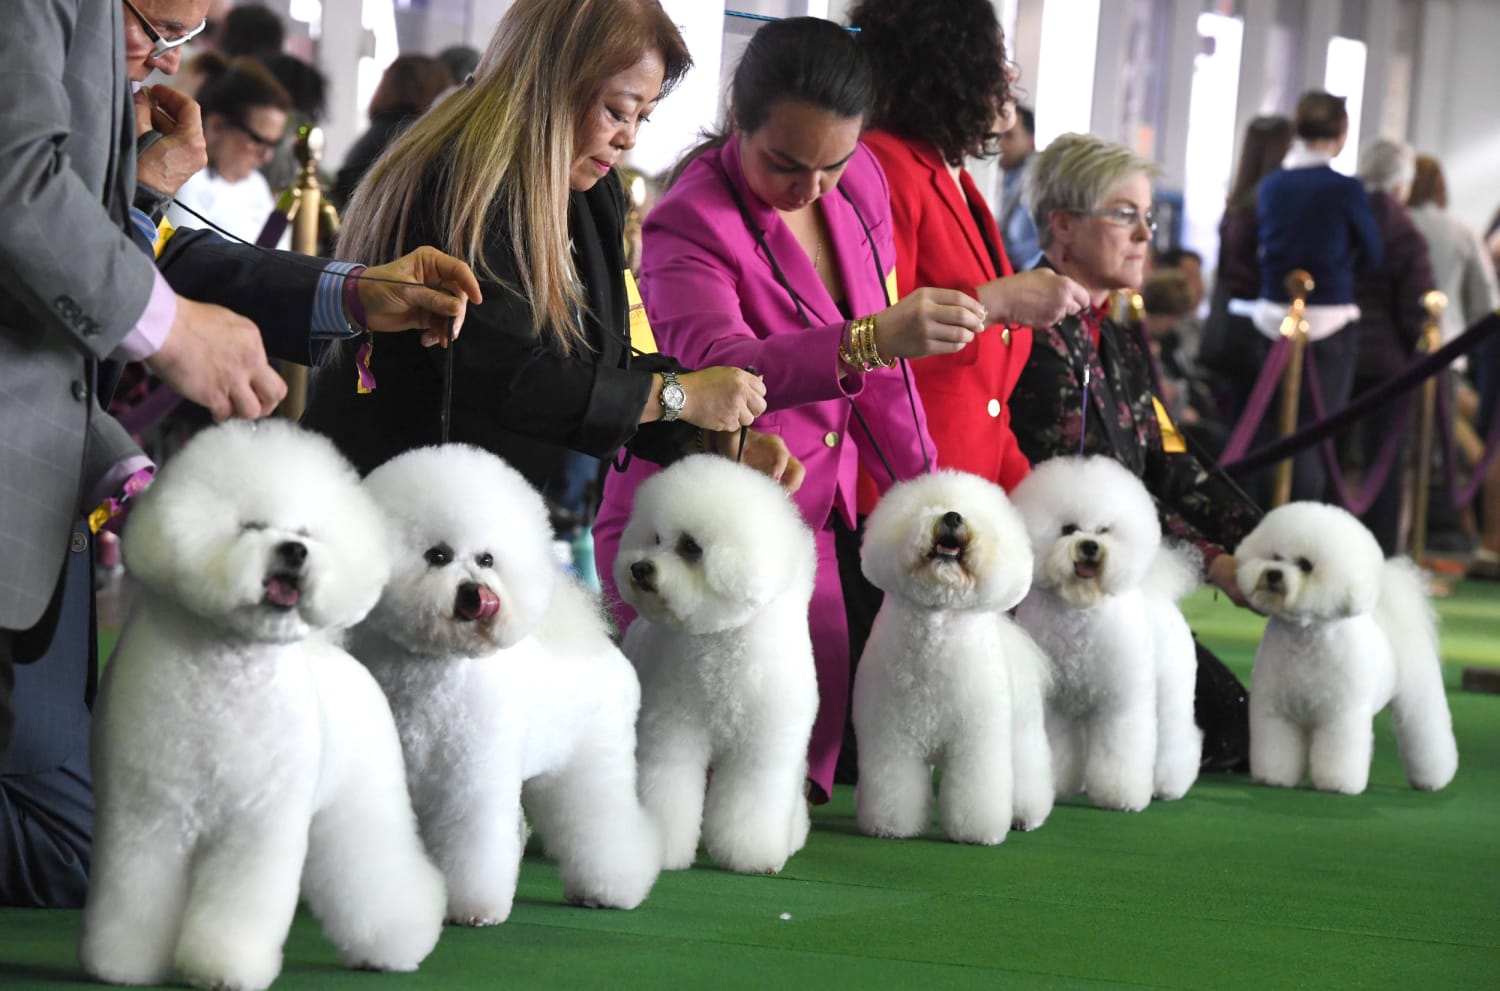 Photos: Pups groomed for success at Westminster dog show